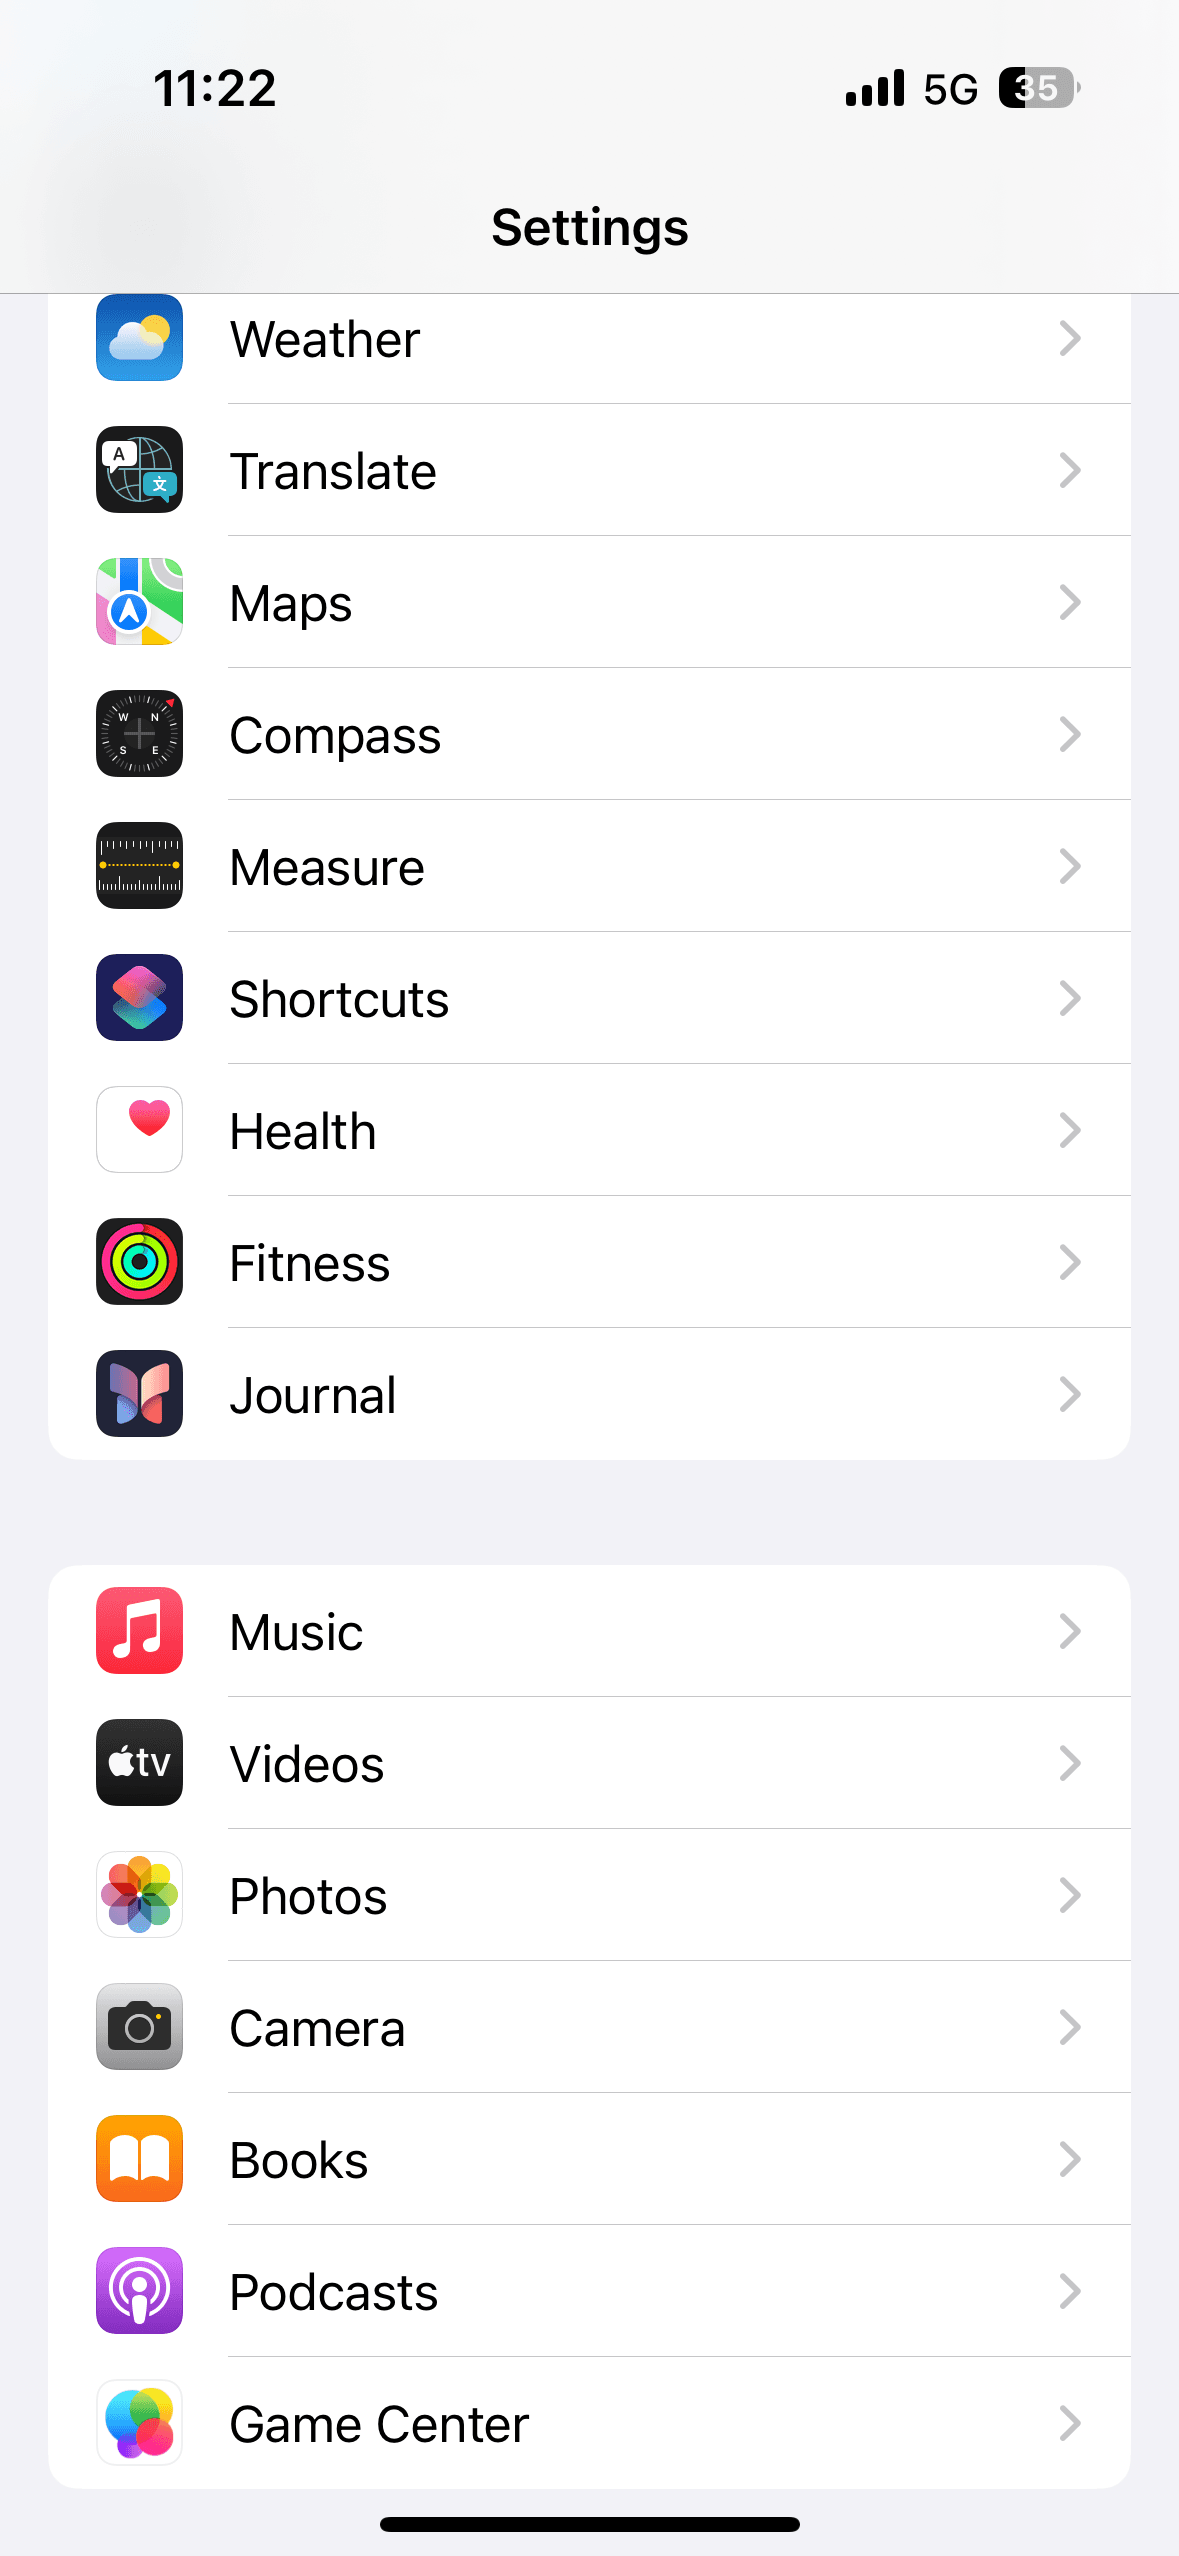 Check installed apps in an iPhone.